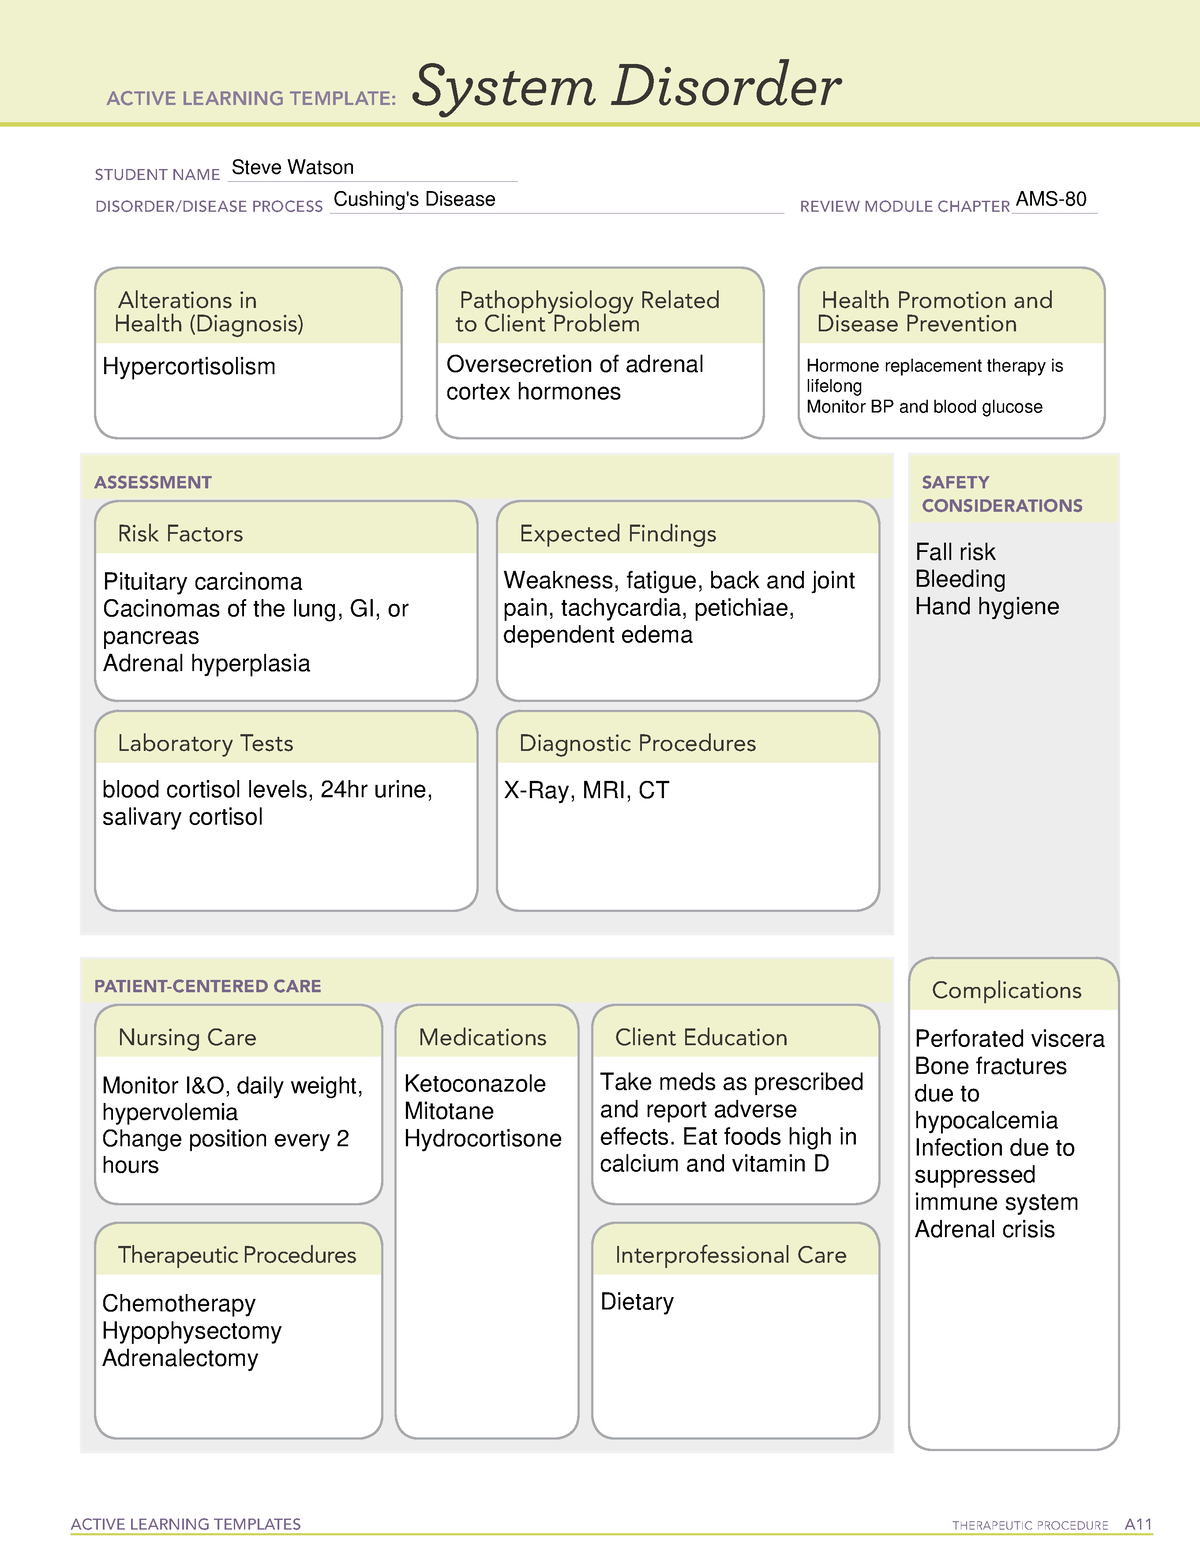 cushing-s-disease-med-sheets-for-ati-assignments-for-fall-2021-active